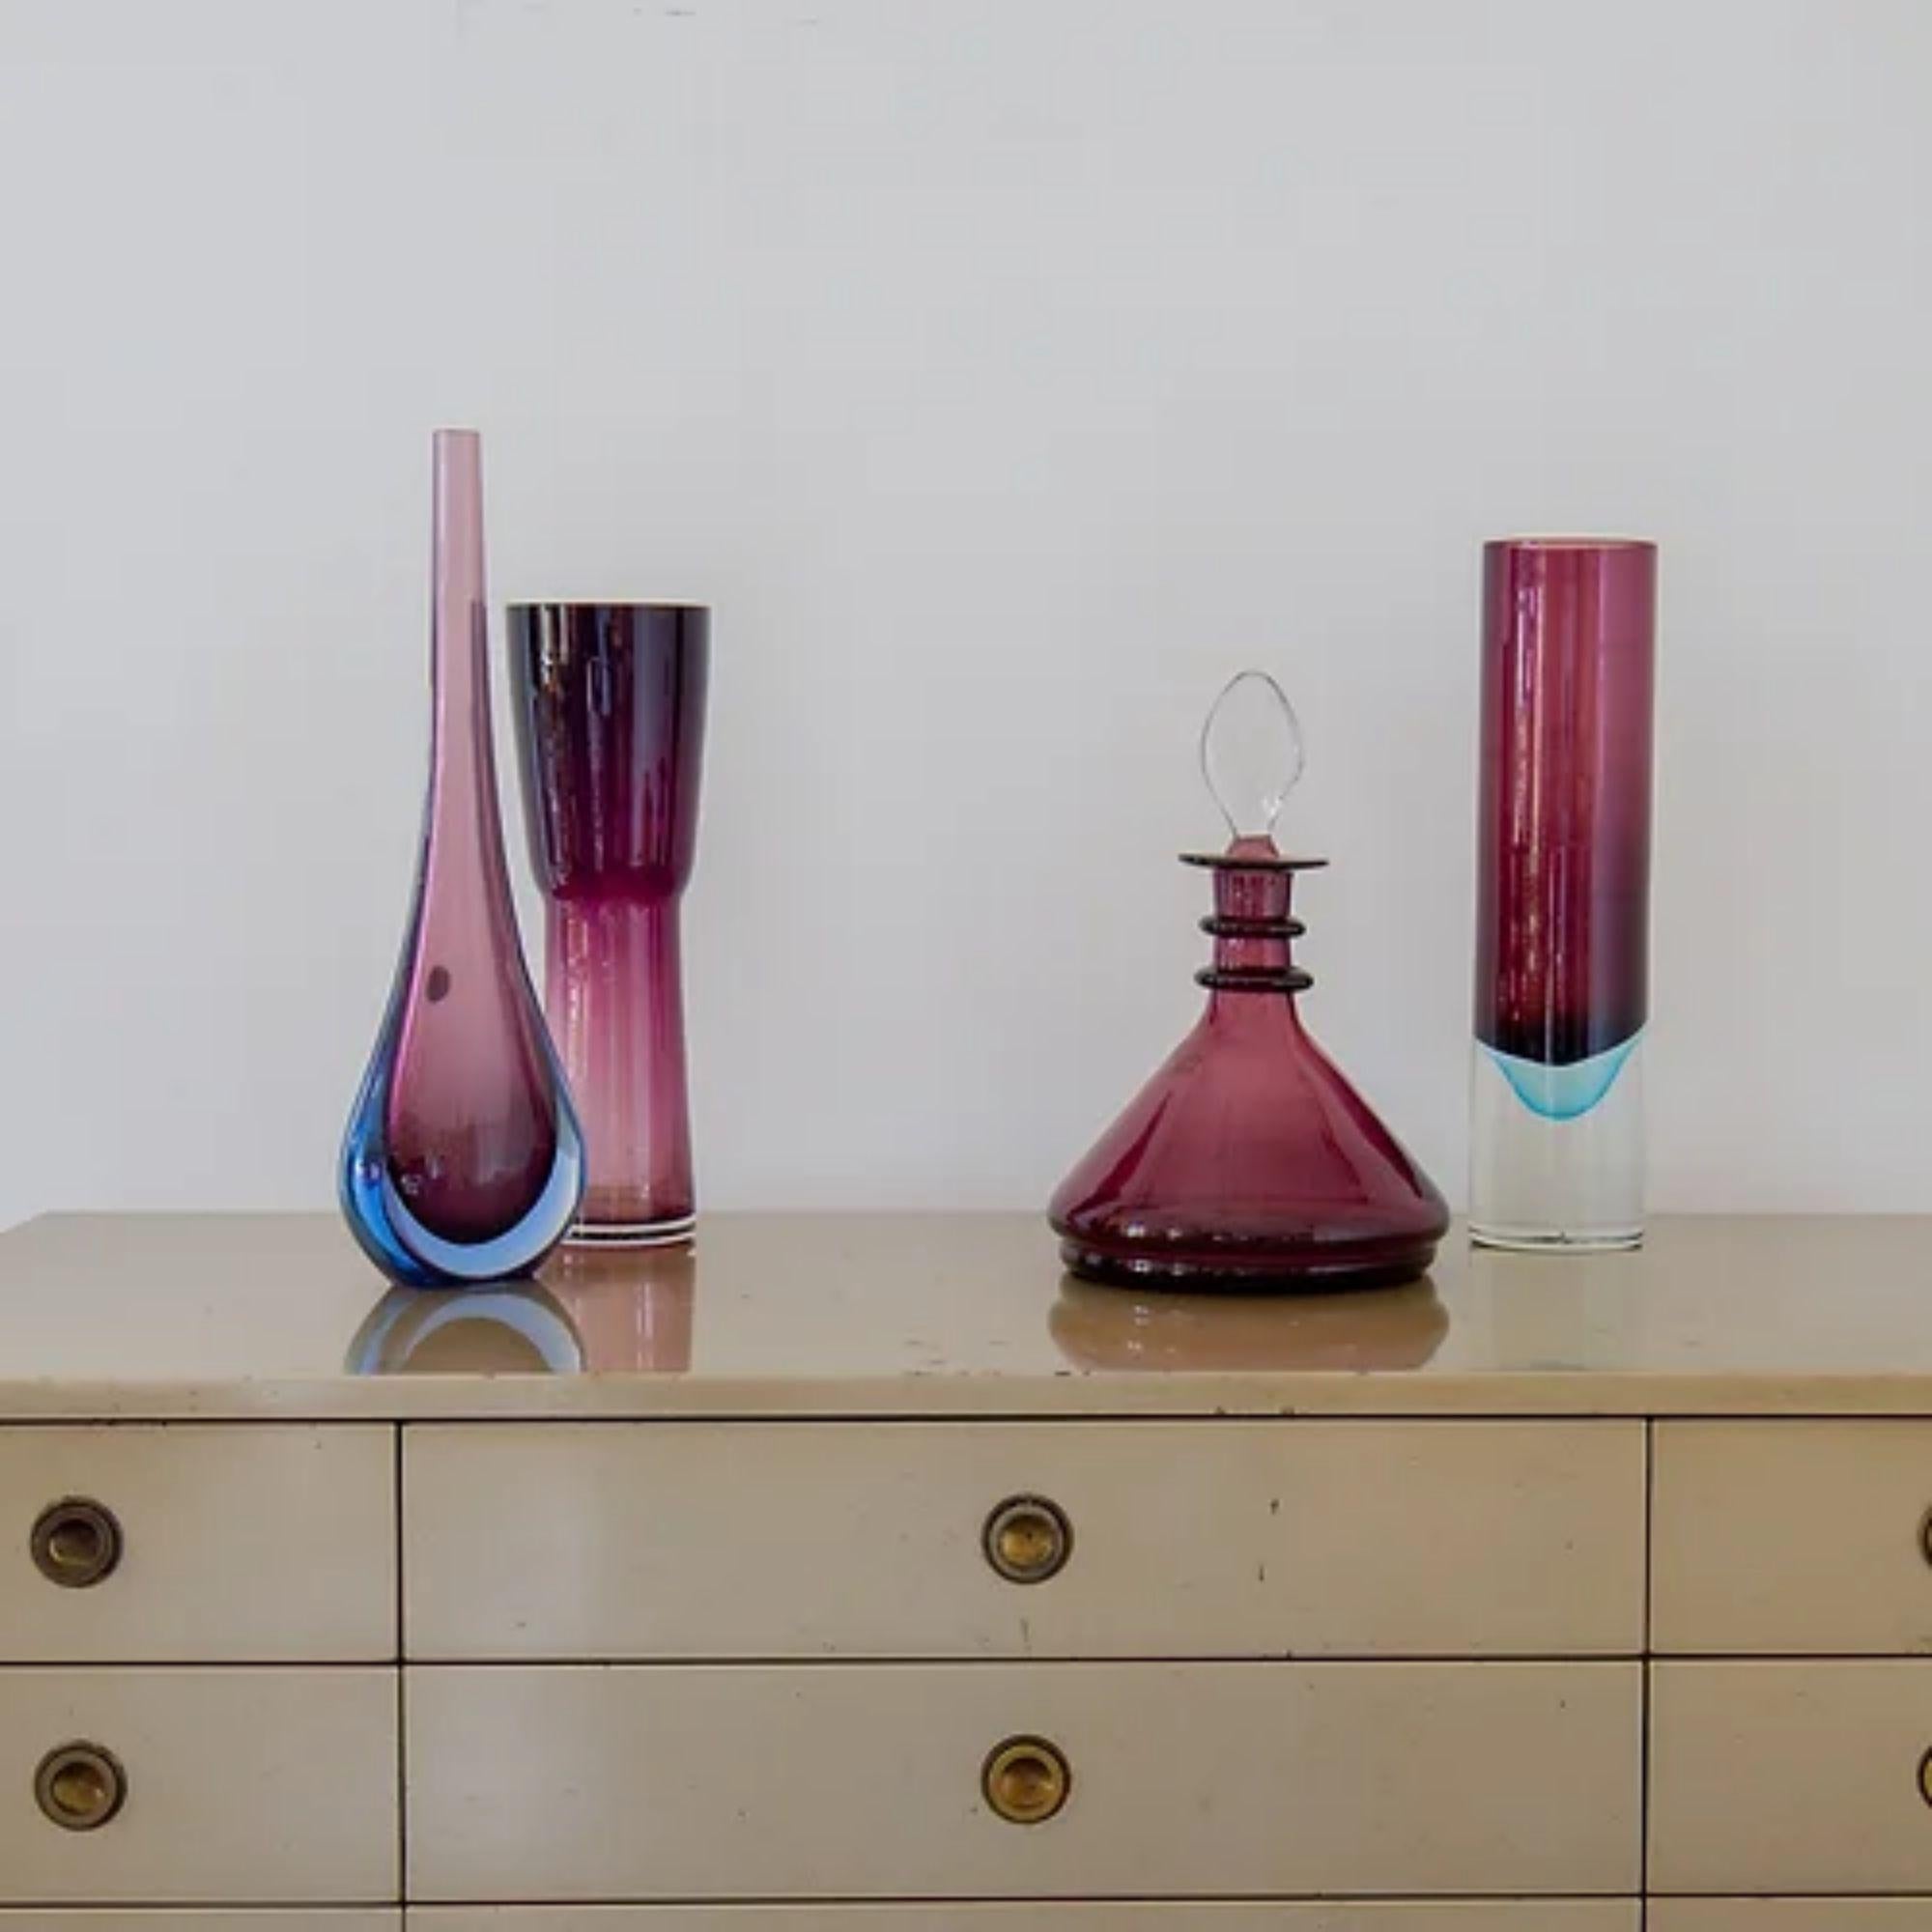 A group of four plum purple glass vases comprising of:

A Tall Cyclindrical Sommerso Glass Vase with a Rich Plum and Turquoise Centre Cased Clear Air Bubbled Glass
32cms high x 8cms diameter

A Plum Glass Decanter by The Blenko Glass Company of